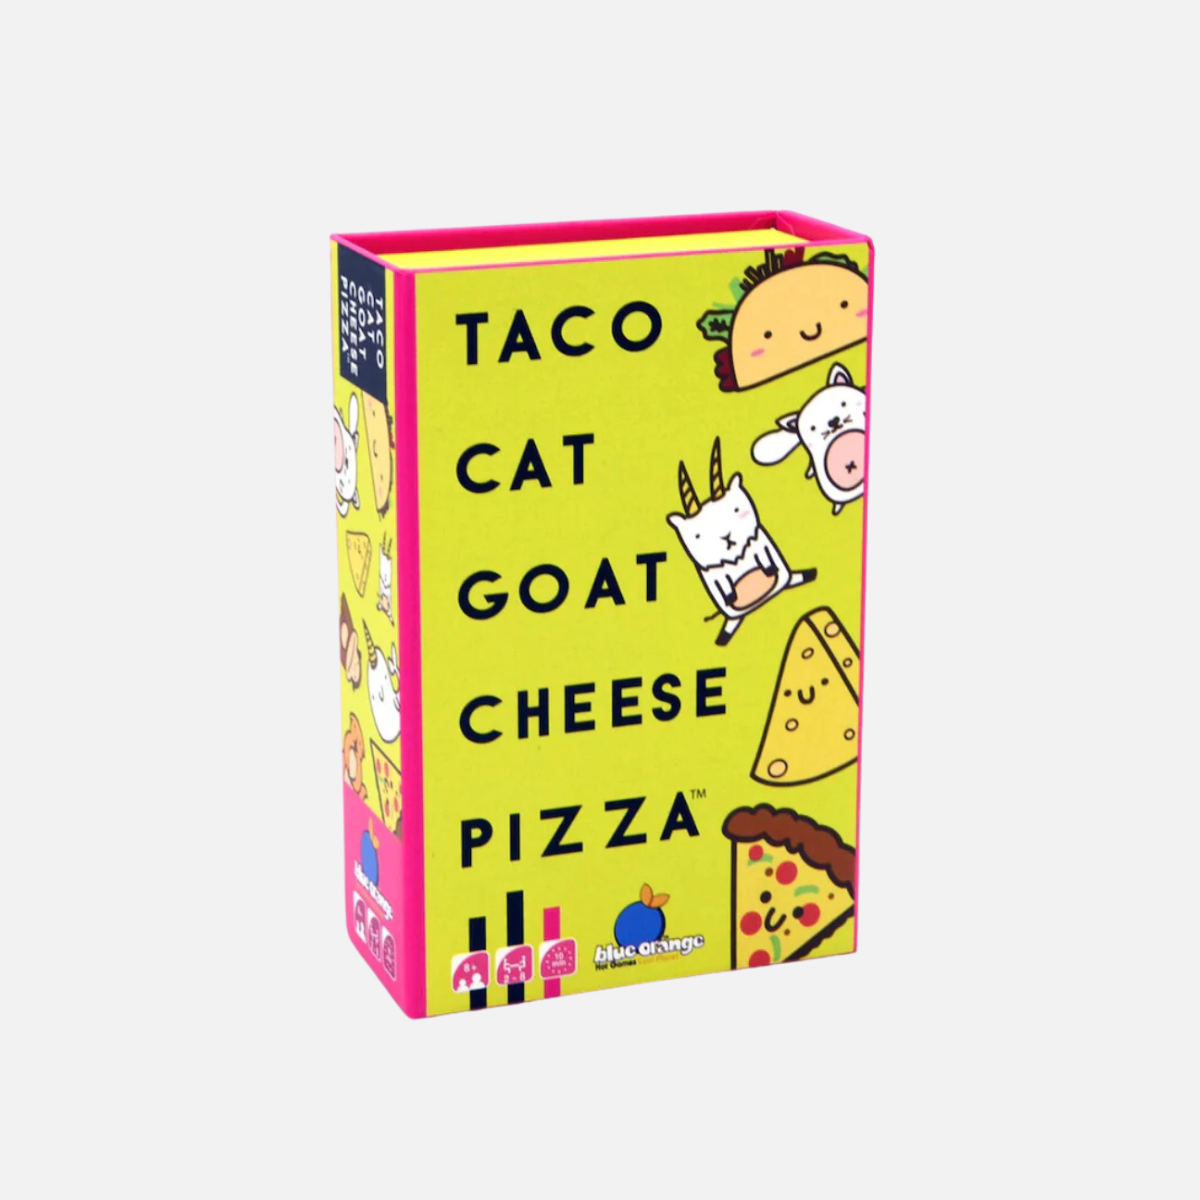 Taco Cat Goat Cheese Pizza board game